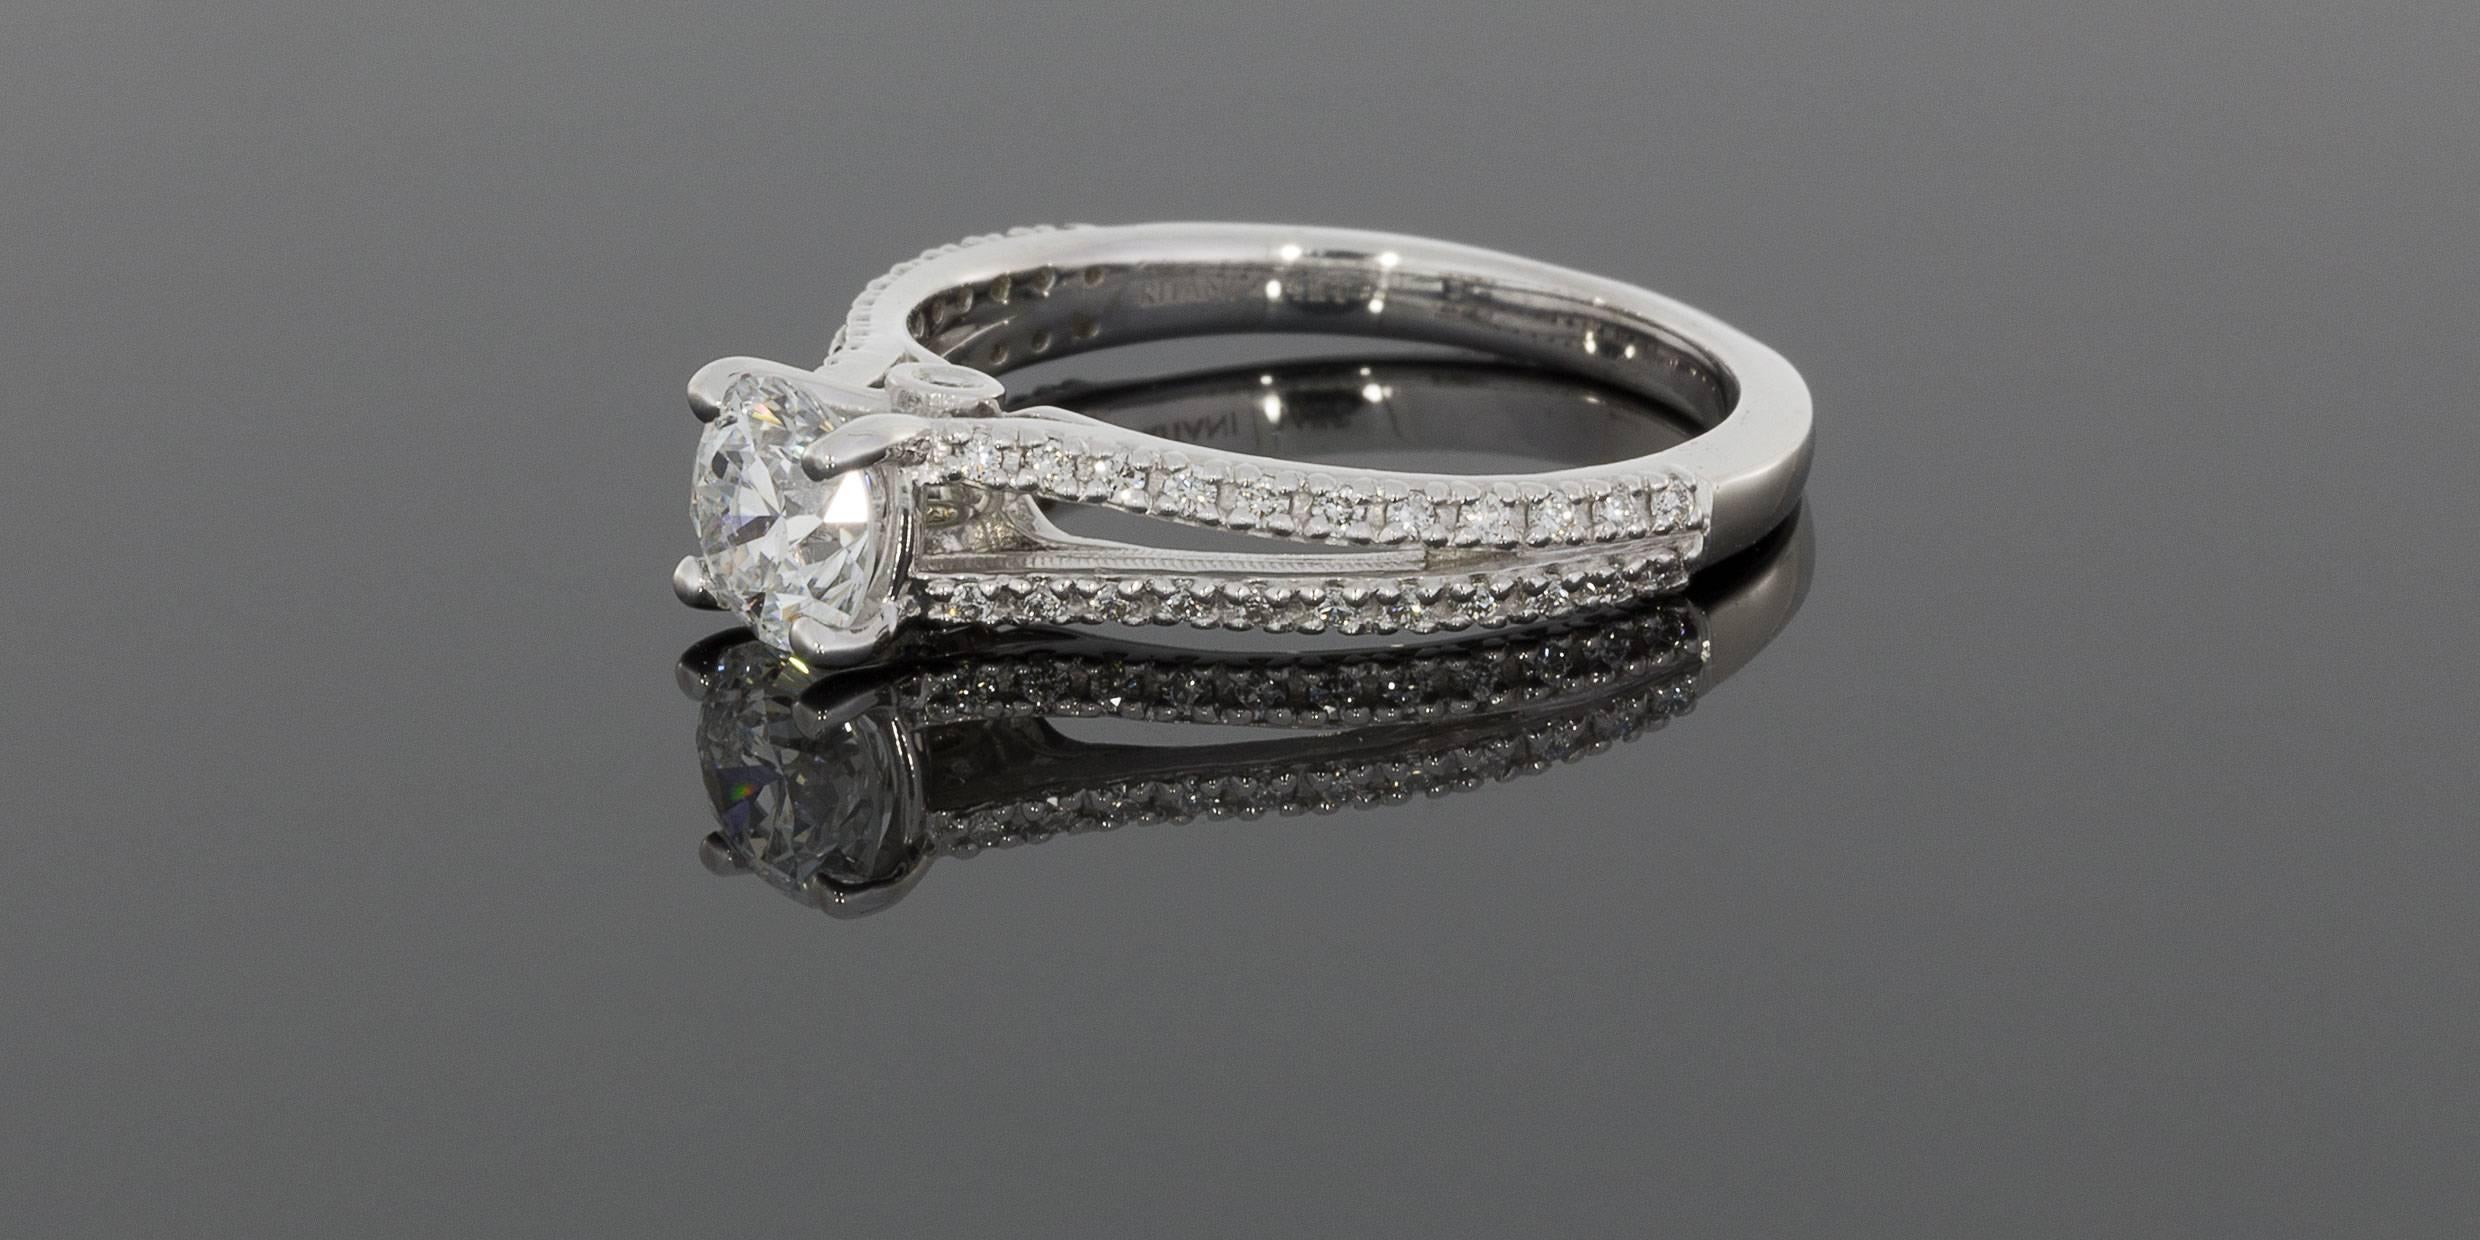 This beautiful diamond halo engagement ring is from the designer Ritani, one of the most recognized designers in the world. Ritani engagement rings feature the world's most beautiful diamonds & gemstones, hand selected by in-house, certified